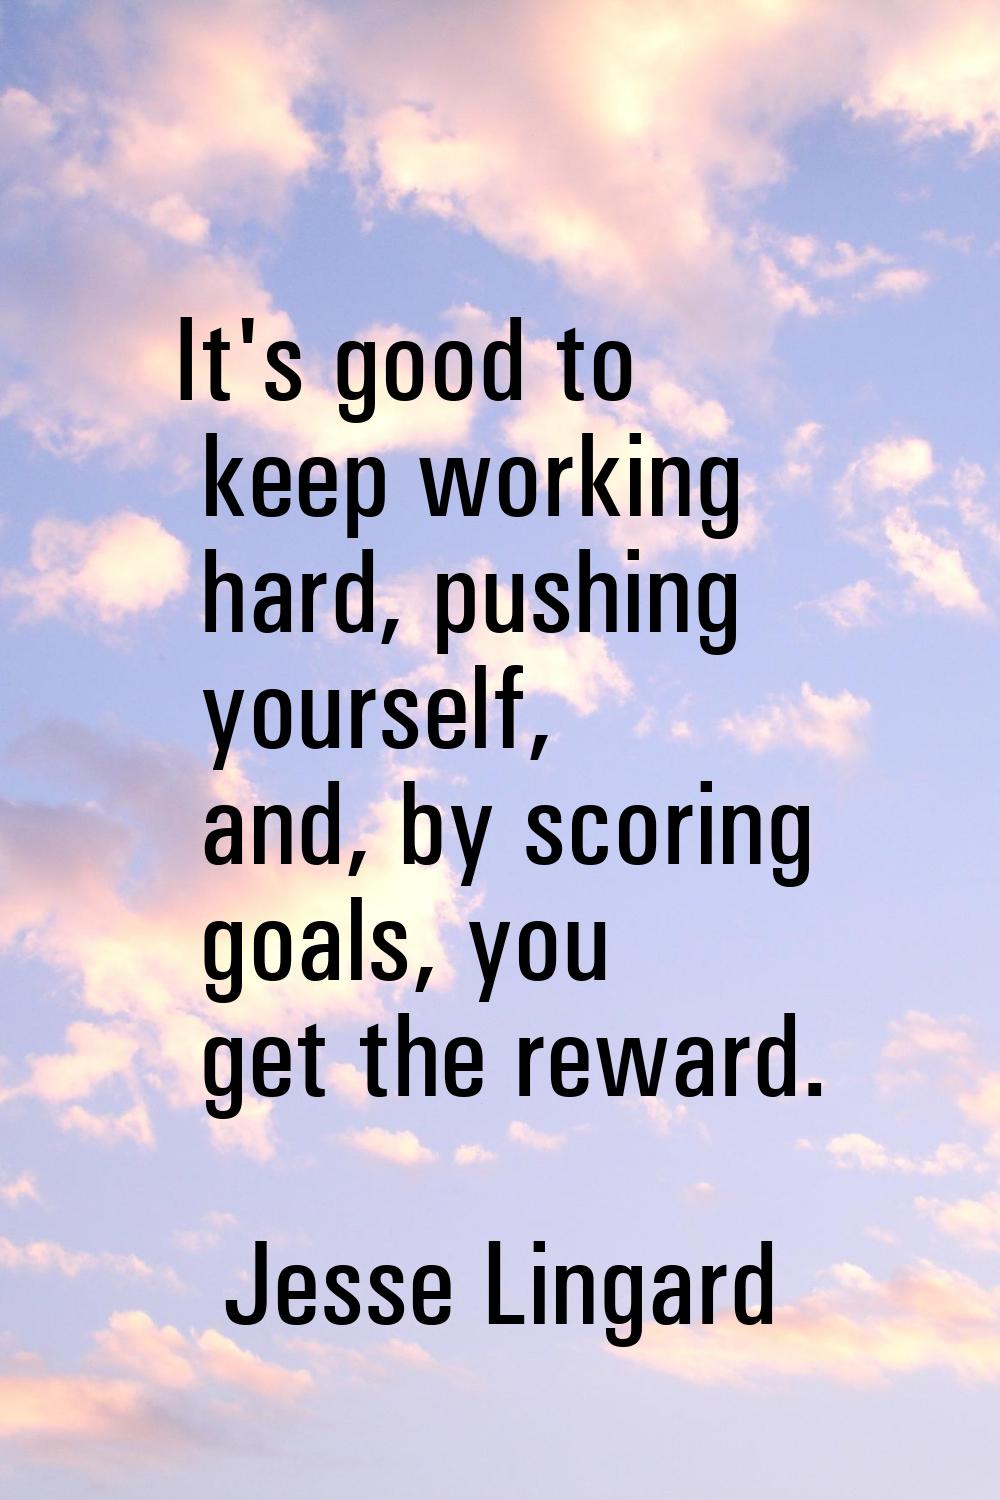 It's good to keep working hard, pushing yourself, and, by scoring goals, you get the reward.